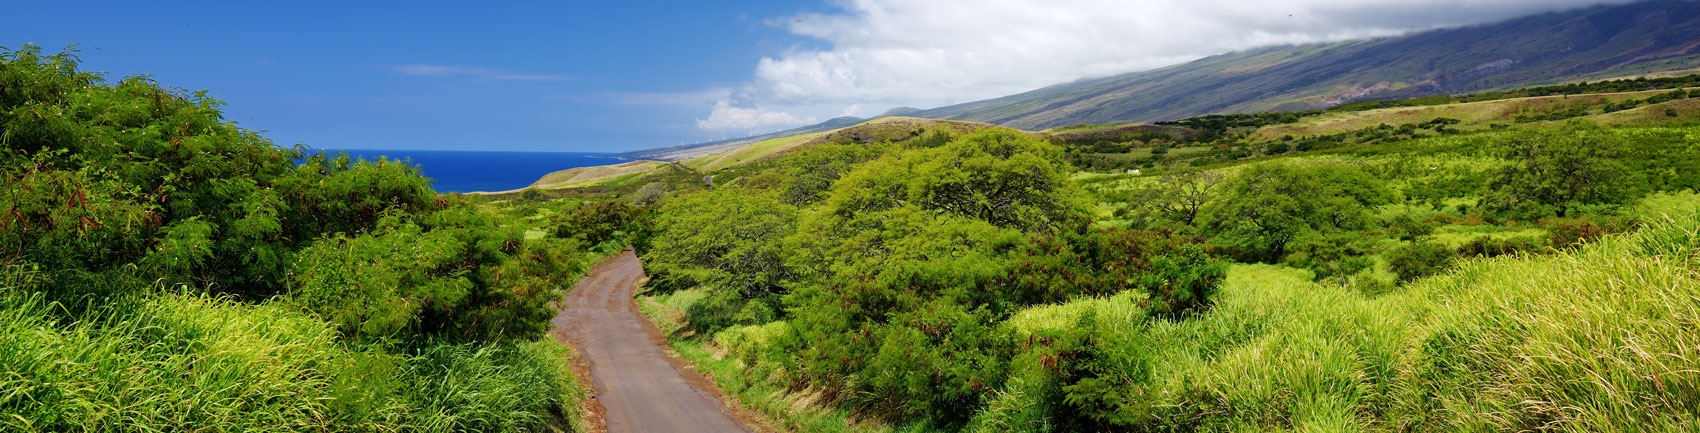 View of Haleakala road with blue sky surrounded by green bushes and grass.